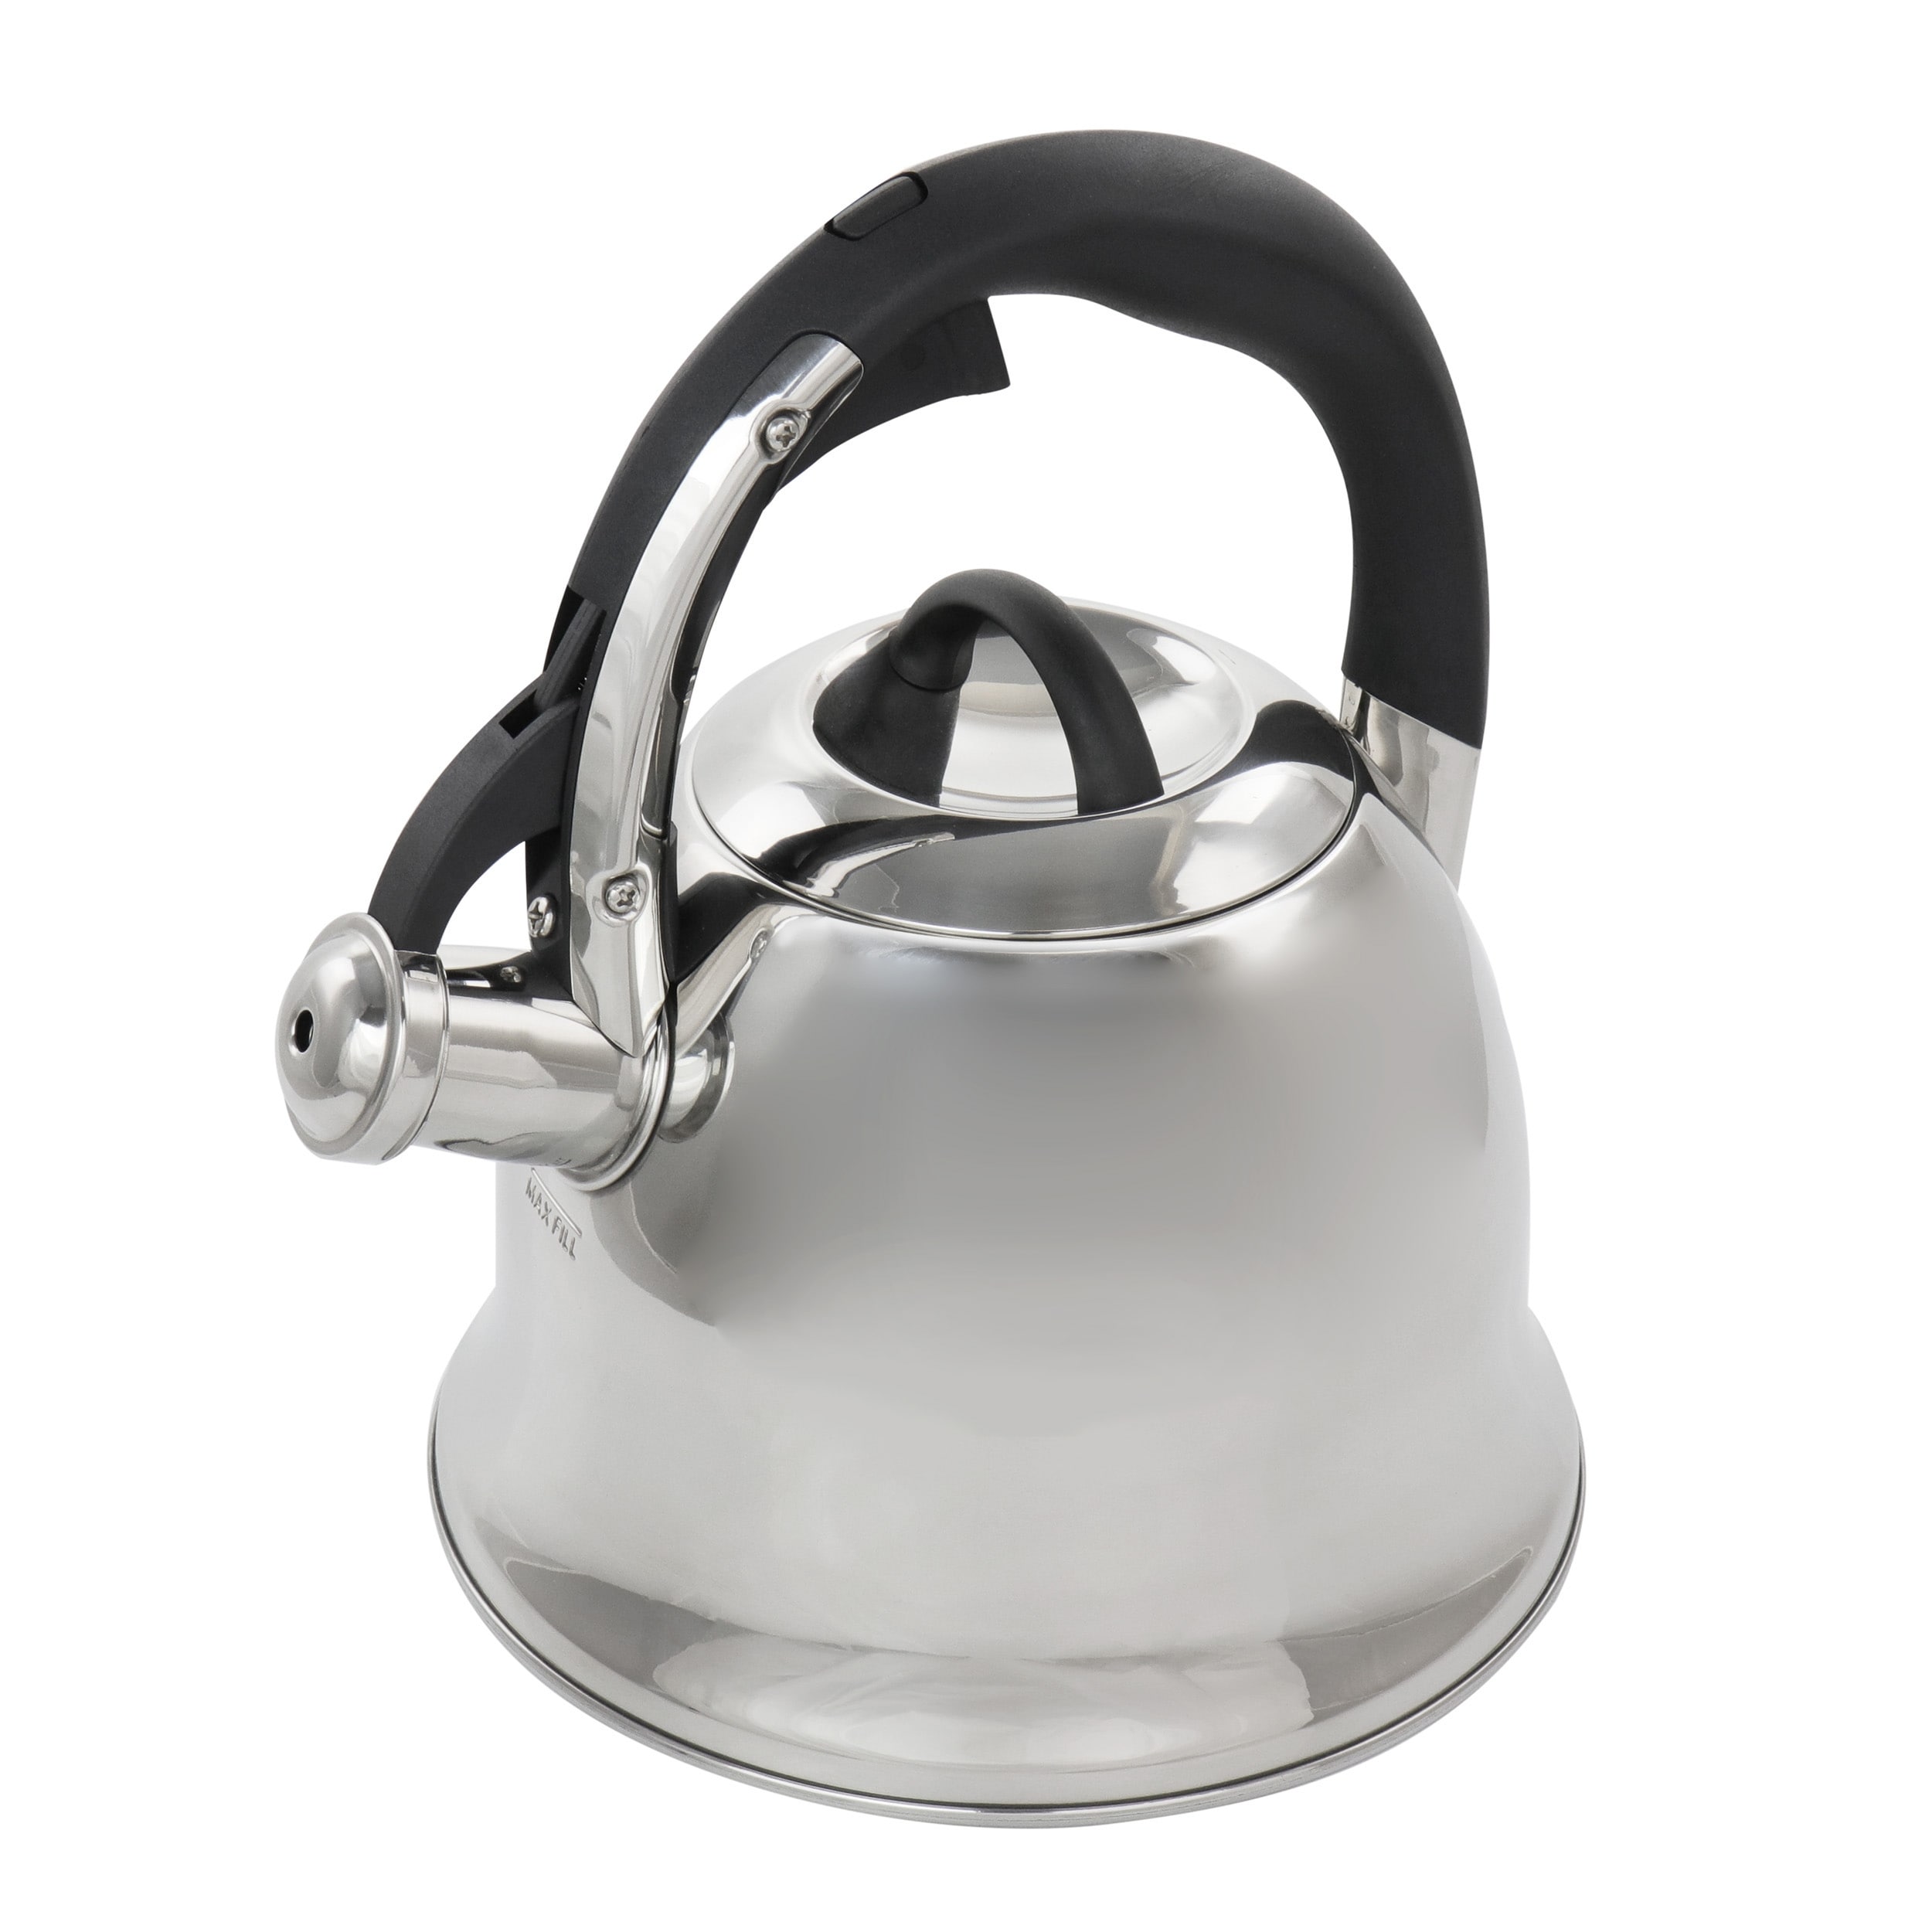 2 Liters Stainless Steel Teakettle With Strainer, Stovetop Tea Kettle  Whistling Teapot With Cool Grip Handle